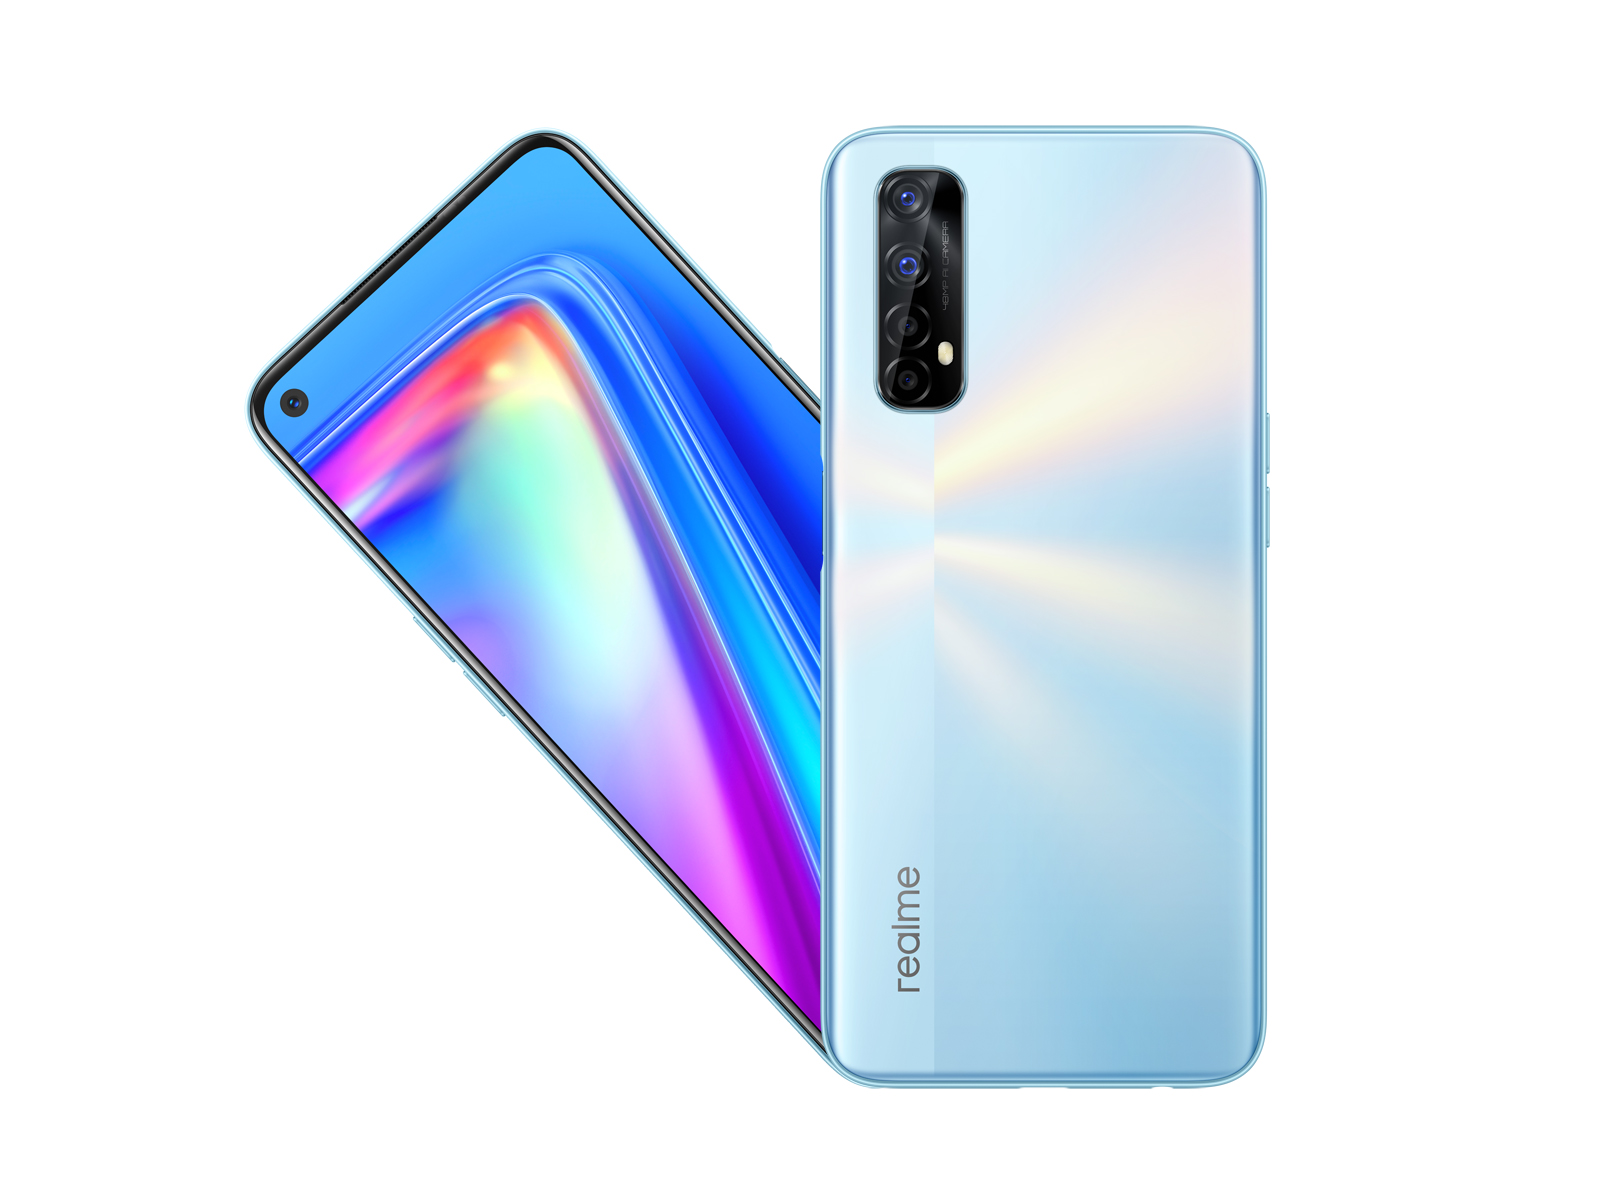 Realme 7 Smartphone Review - China phone with great performance for the  money - NotebookCheck.net Reviews